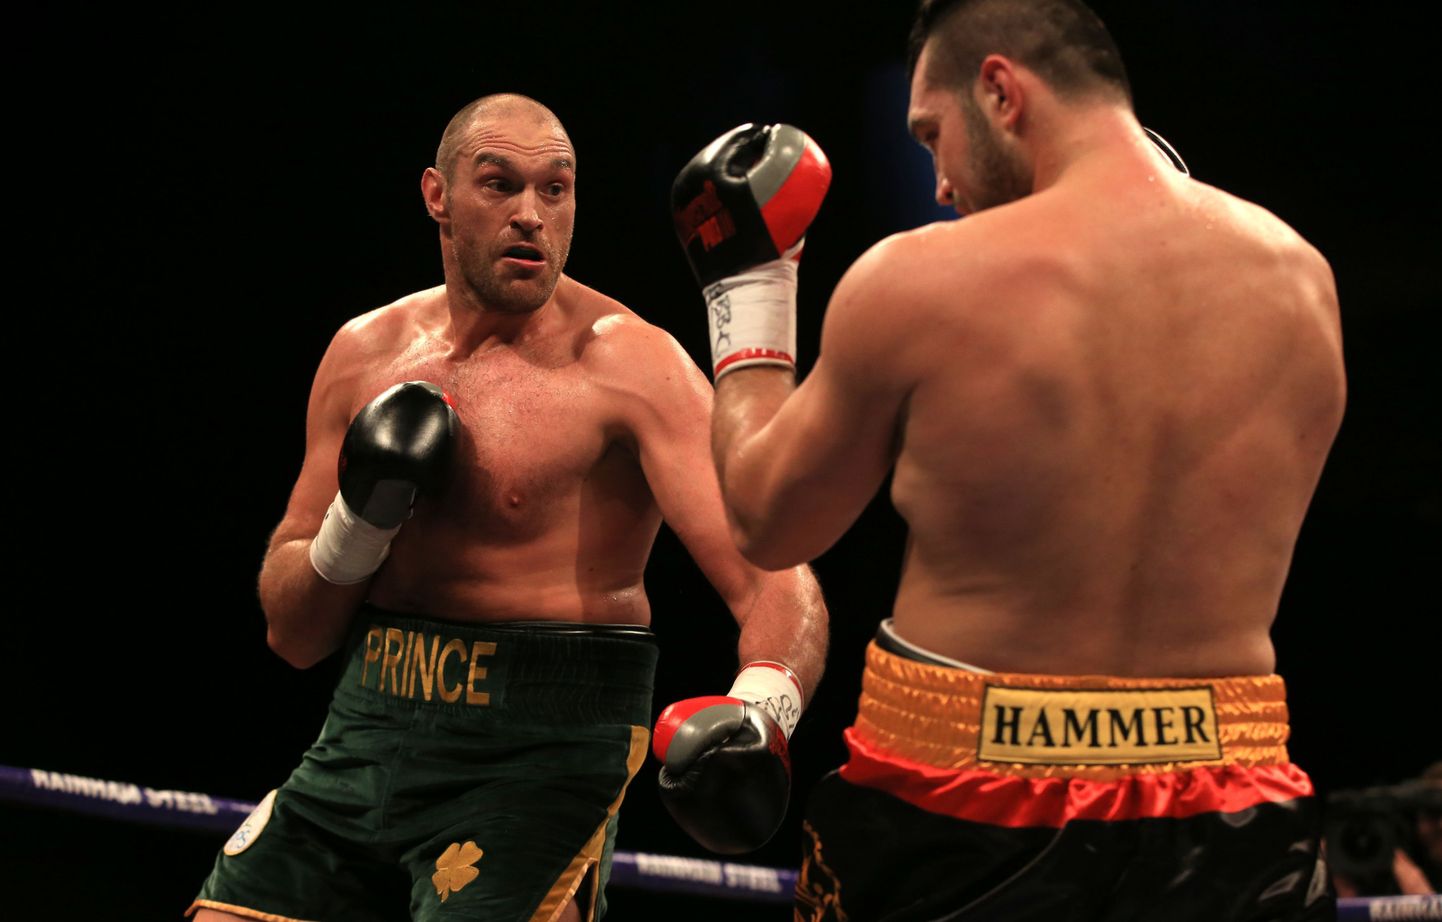 Tyson Fury (left) in action against Christian Hammer in their WBO International Heavyweight Championship bout at the O2 Arena, London.